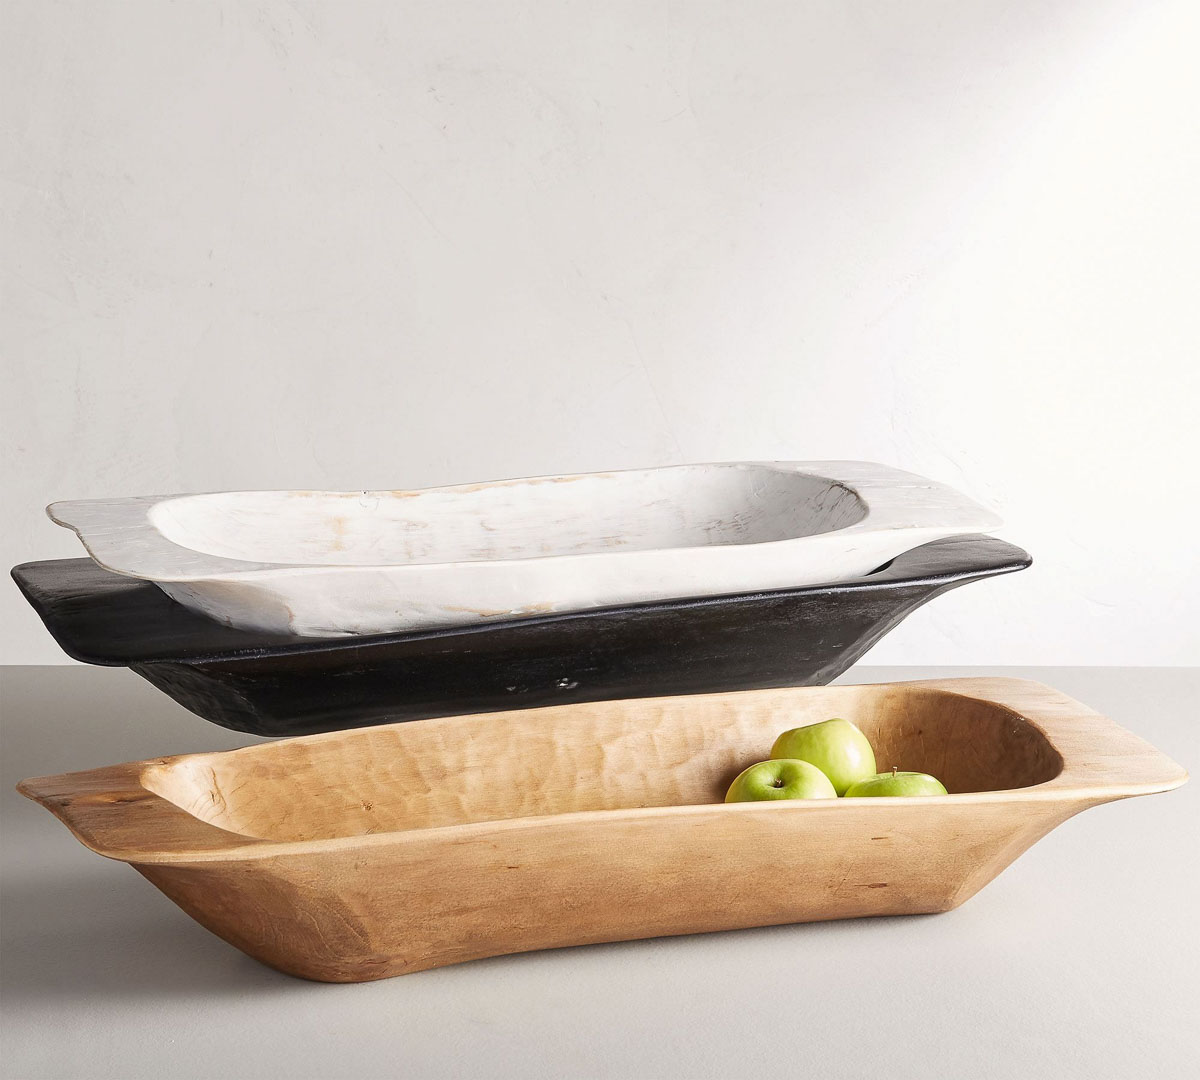 Dough bowls that could be used for dining table centerpieces